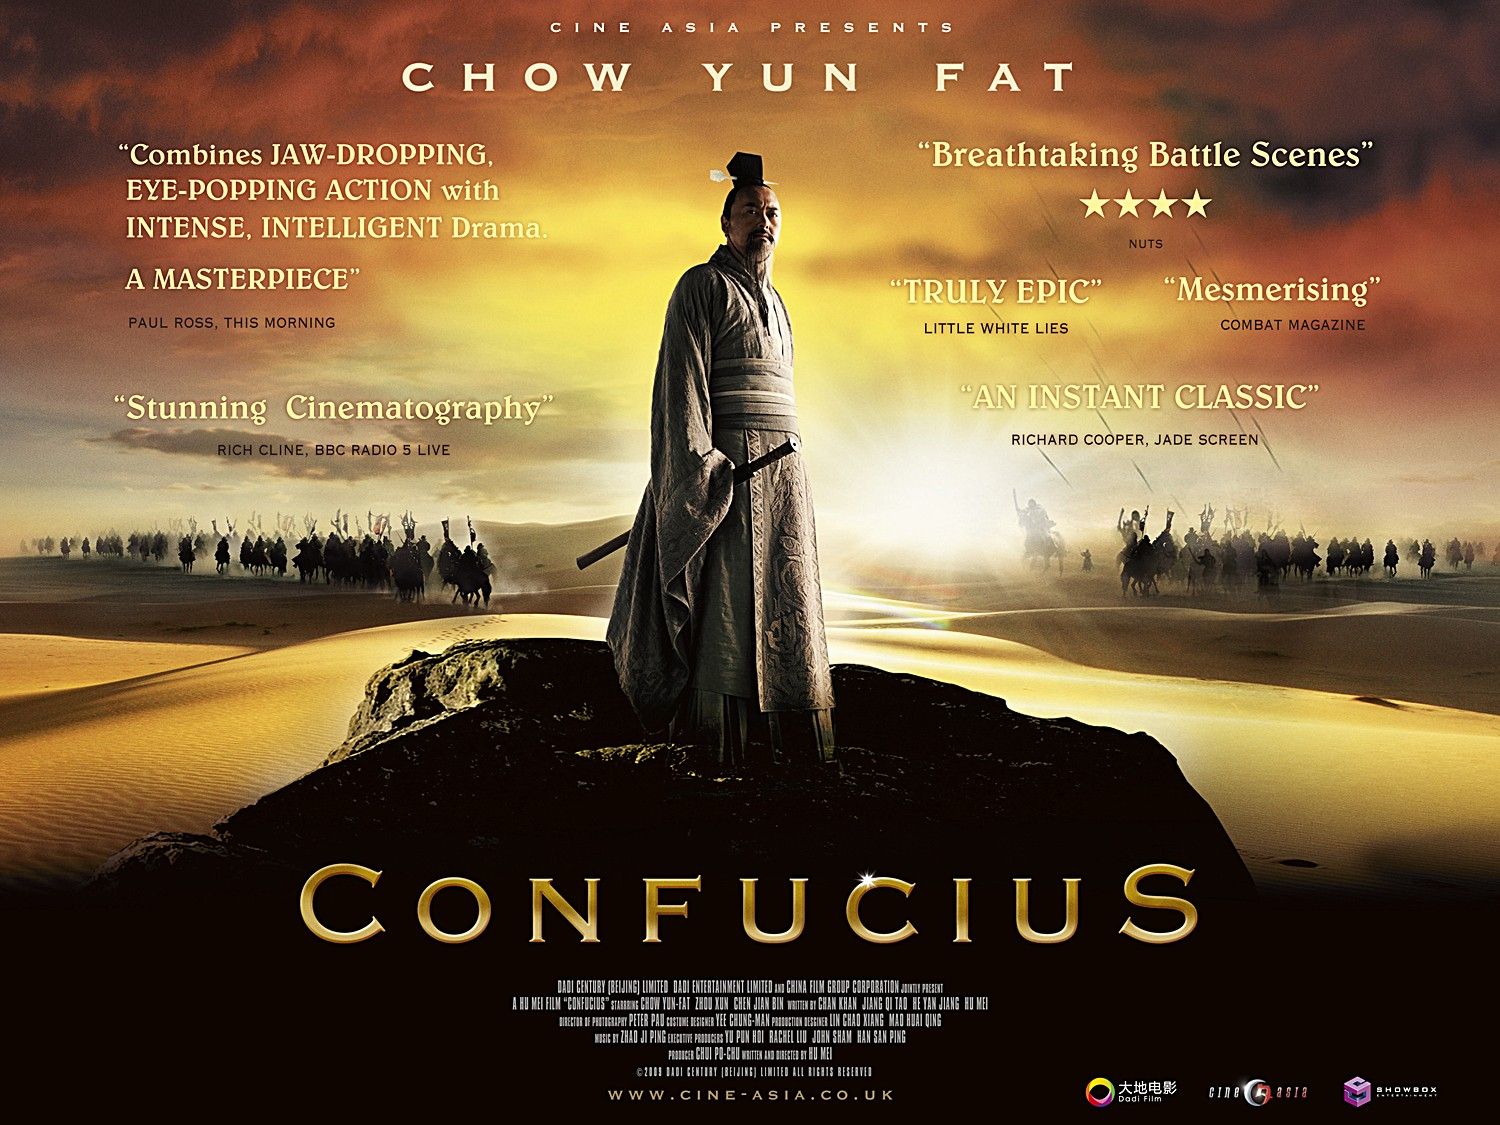 http://www.impawards.com/intl/china/2010/posters/confucius_xlg.jpg